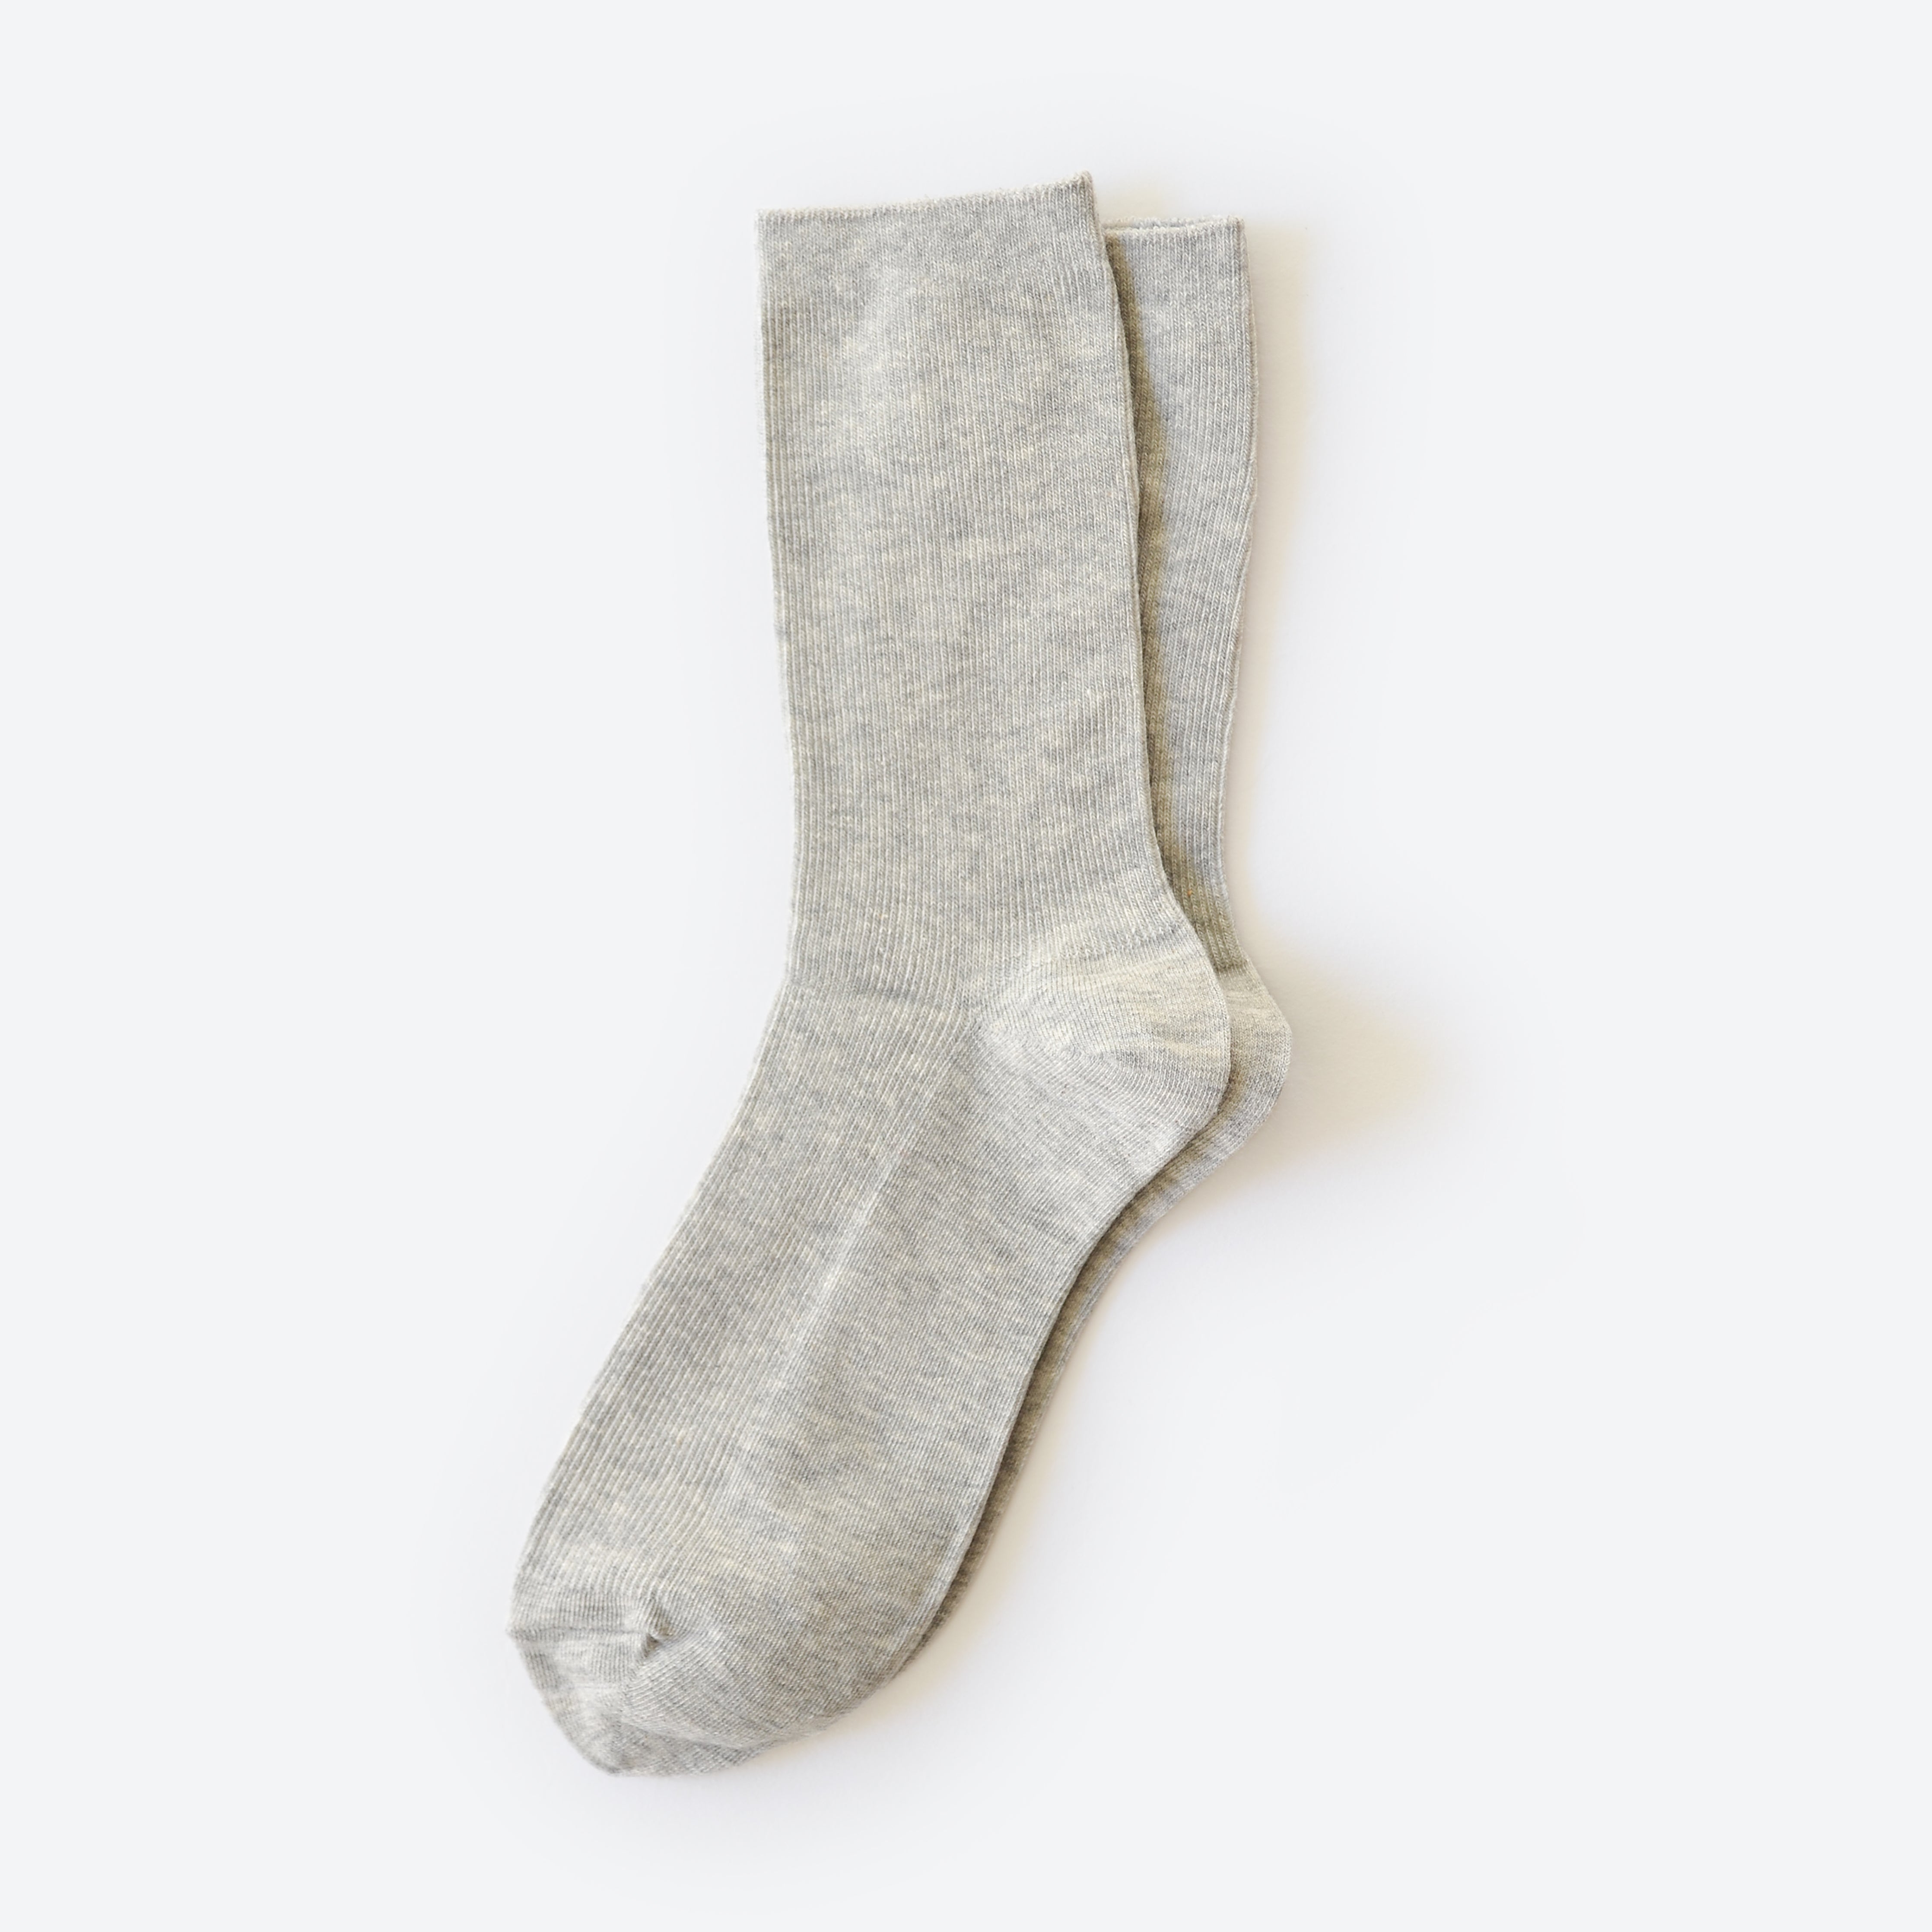 Hooray Sock Co.&#39;s Cement Crew Socks: Everyday Cotton, Colorful hues, Comfy &amp; Stylish. Petite crew, Cement grey, 80% cotton, 20% spandex. Made in South Korea. Unisex. Small (Women’s 4-10).